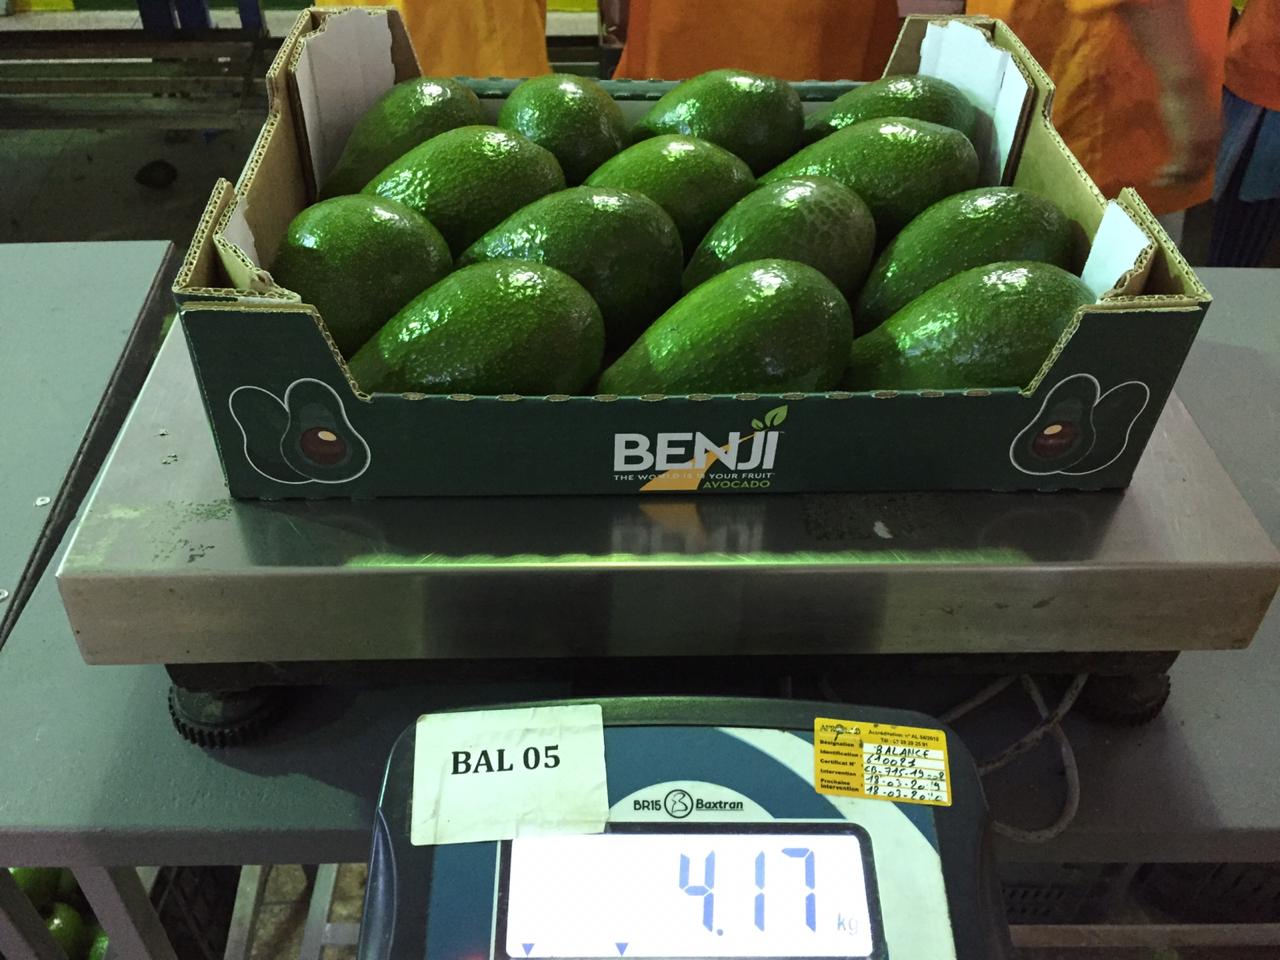 Package of avocados packed in Morocco of the Benji brand - Beva Fruits International (BFI)